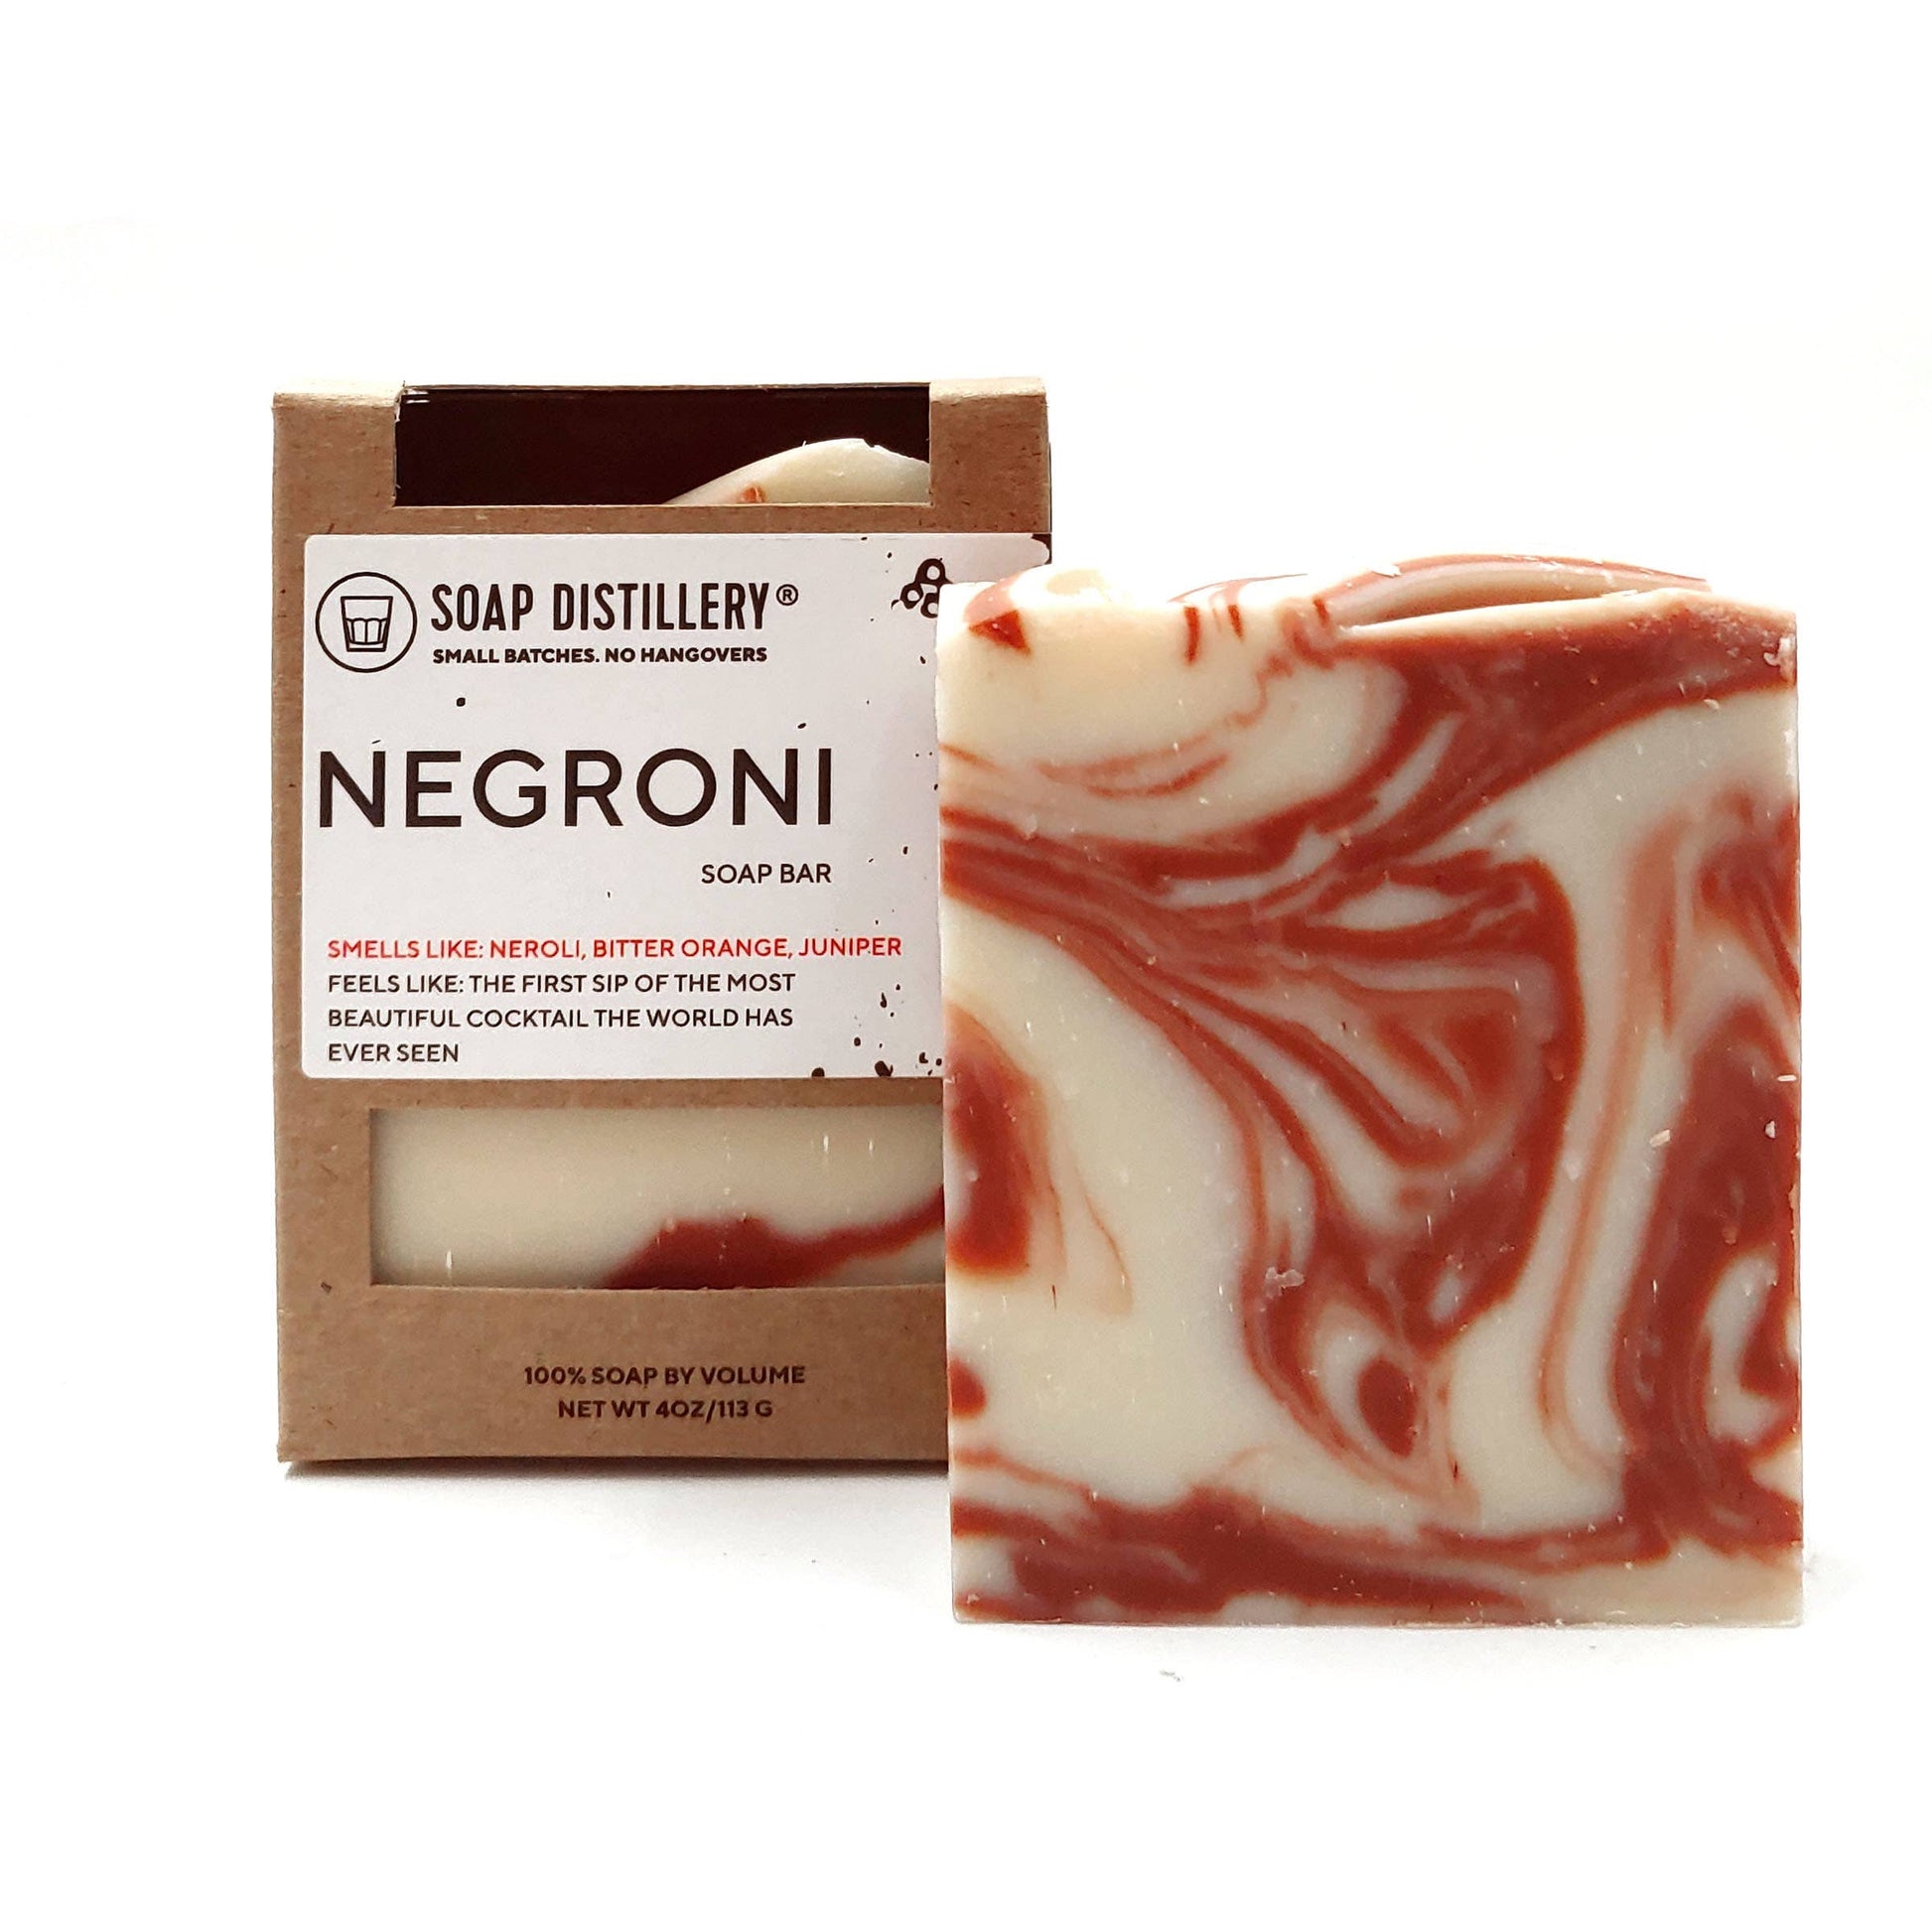 Photo of orange and cream marbeled bar of soap next to a packaged bar of soap in a brown box with a label that says "Negroni" with a description.